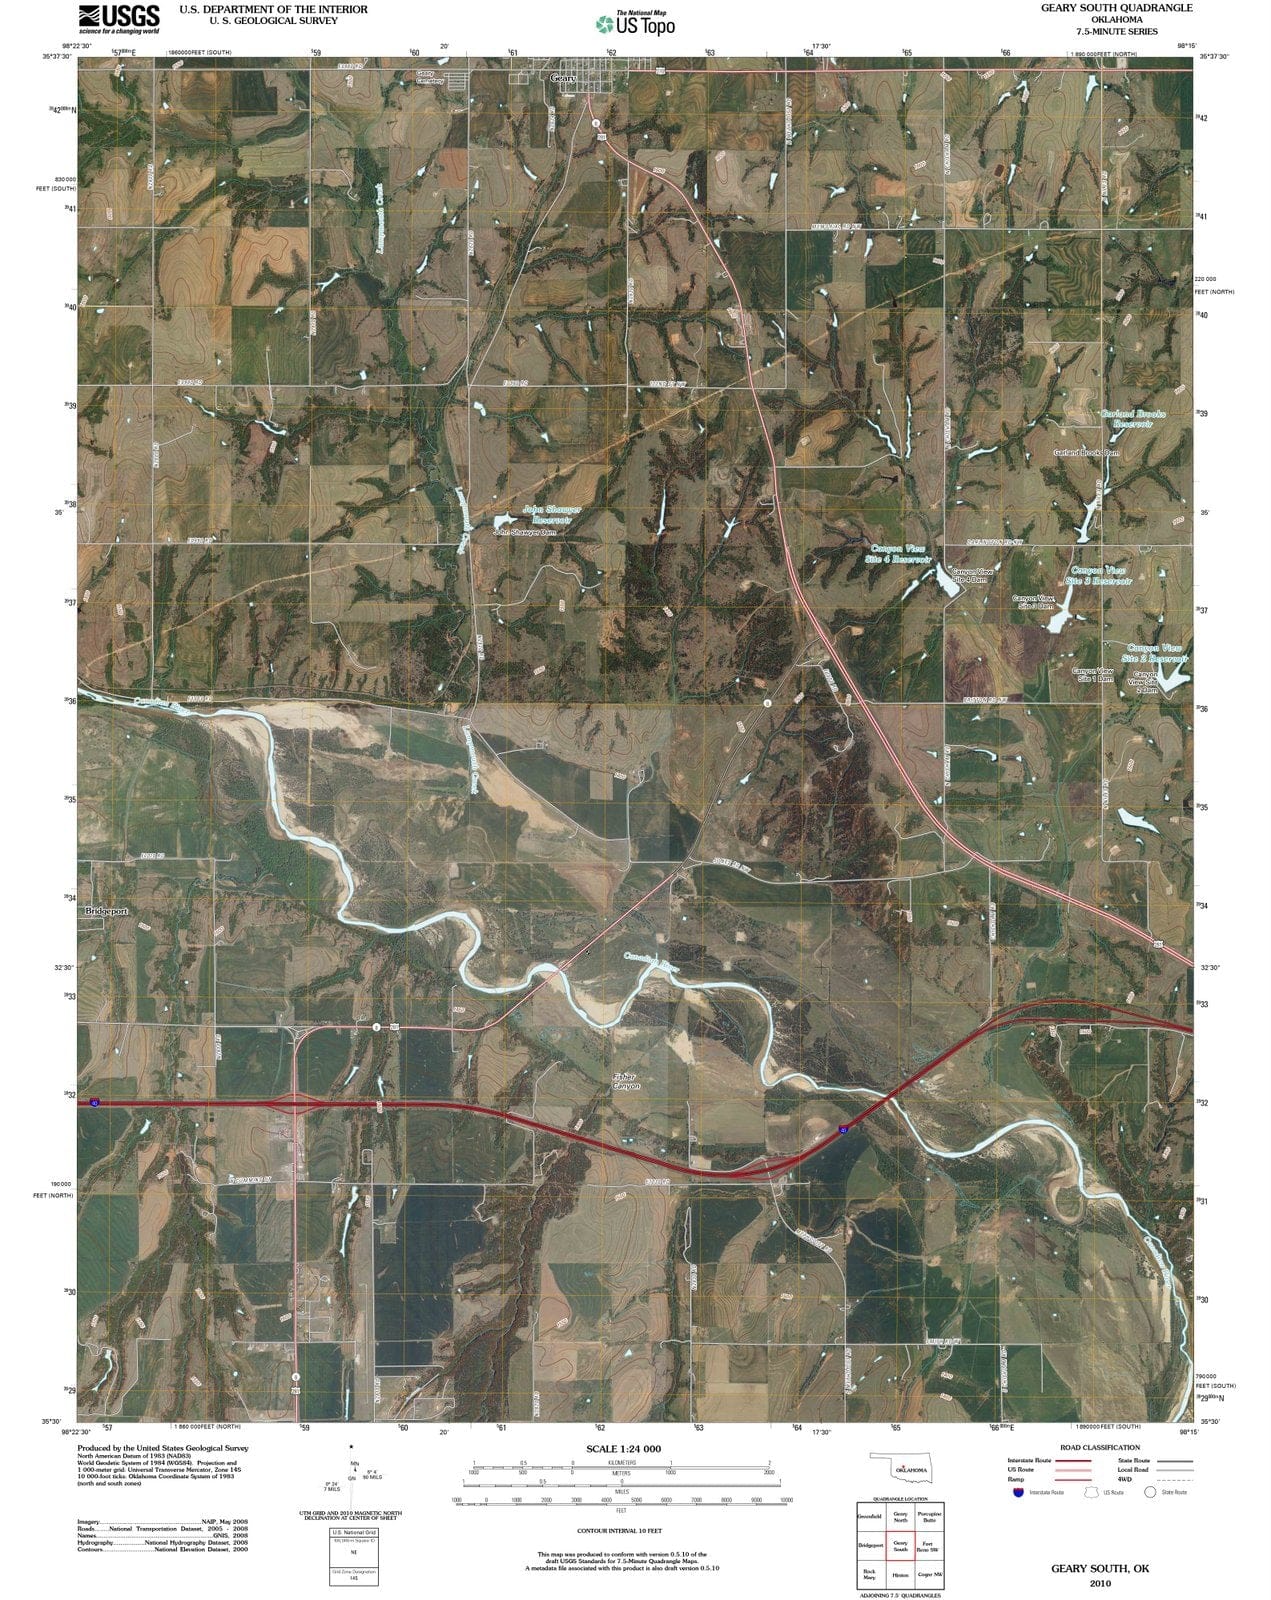 2010 Geary South, OK - Oklahoma - USGS Topographic Map